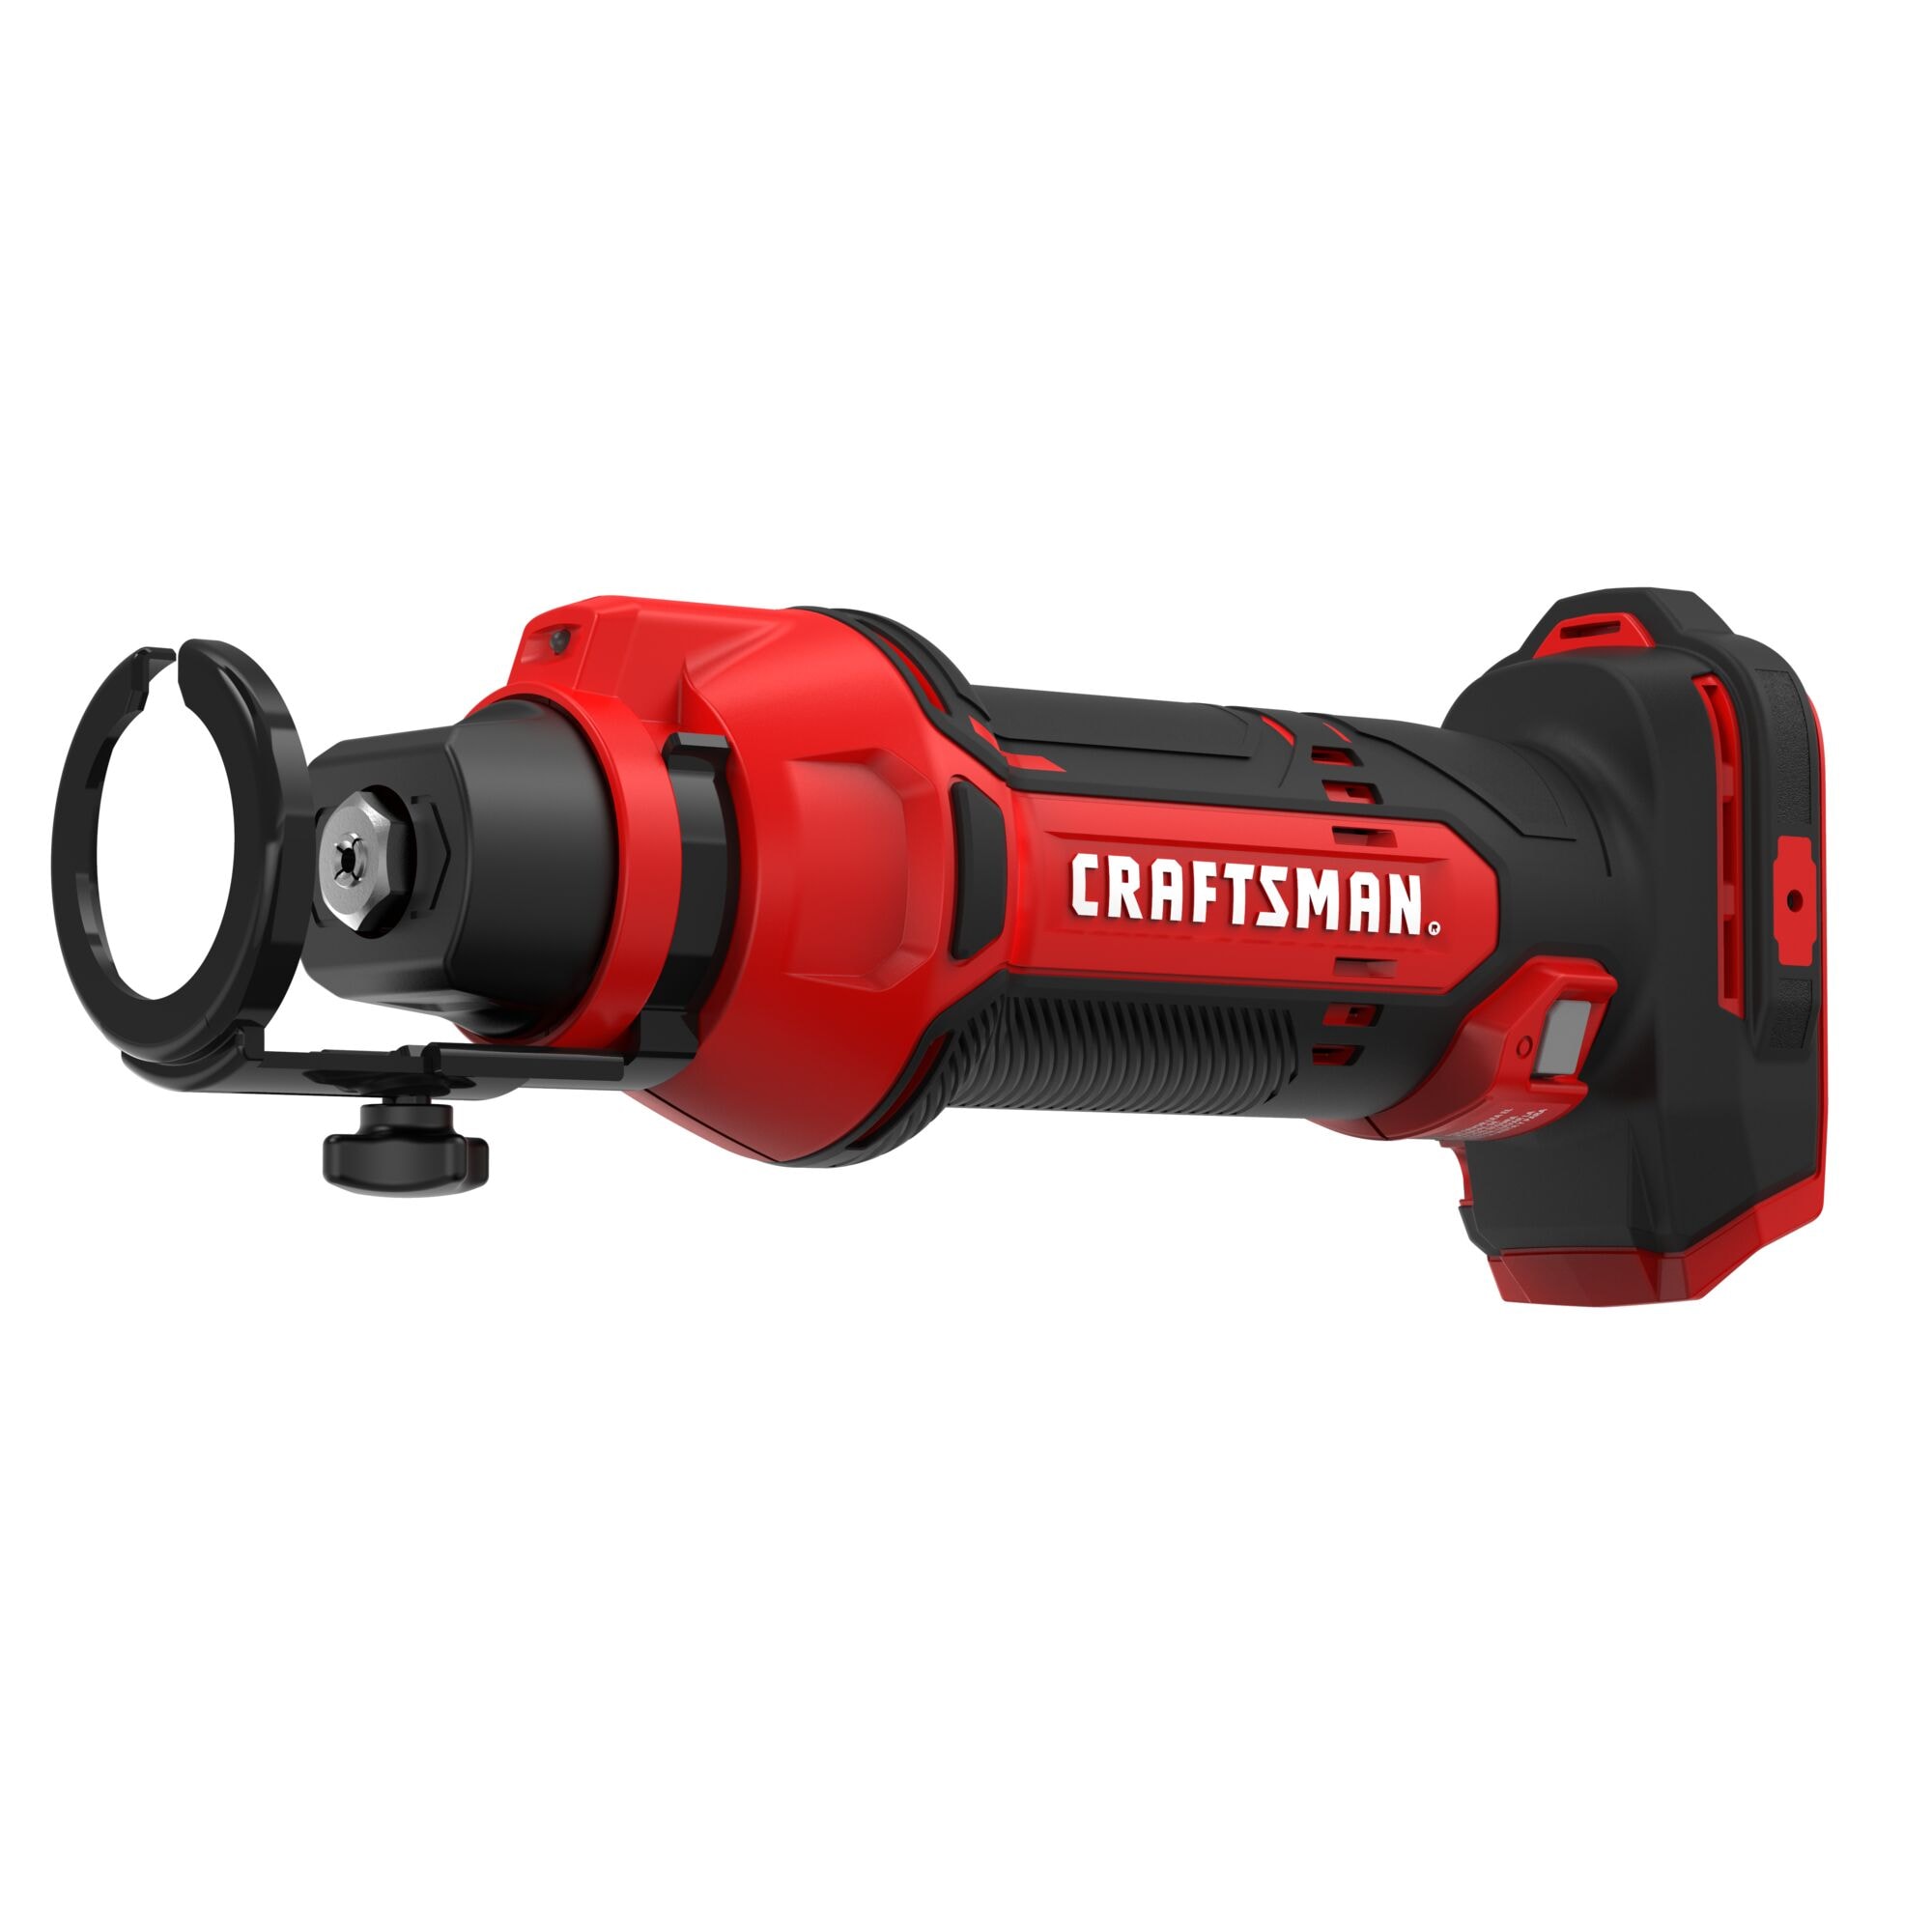 This Drywall Cutting Tool is PERFECT for Novices AND Pros. Win it below 